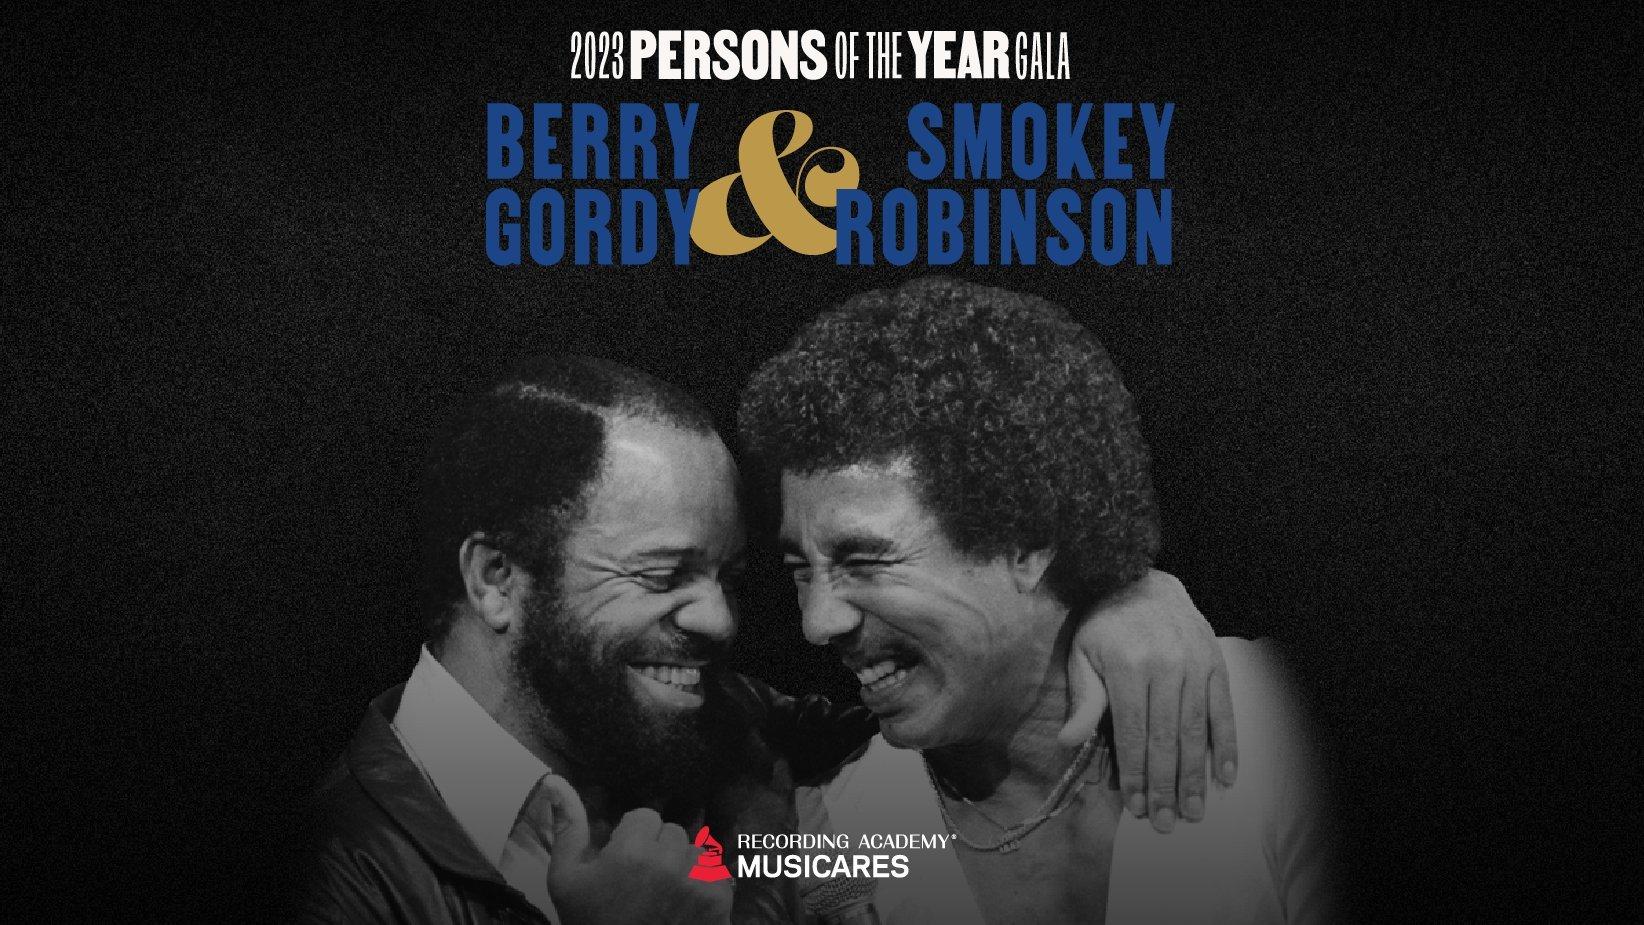 Sheryl Crow, The Temptations, John Legend and More To Perform At The 2023 MusiCares Persons Of The Year Tribute Honoring Berry Gordy And Smokey Robinson GRAMMY pic